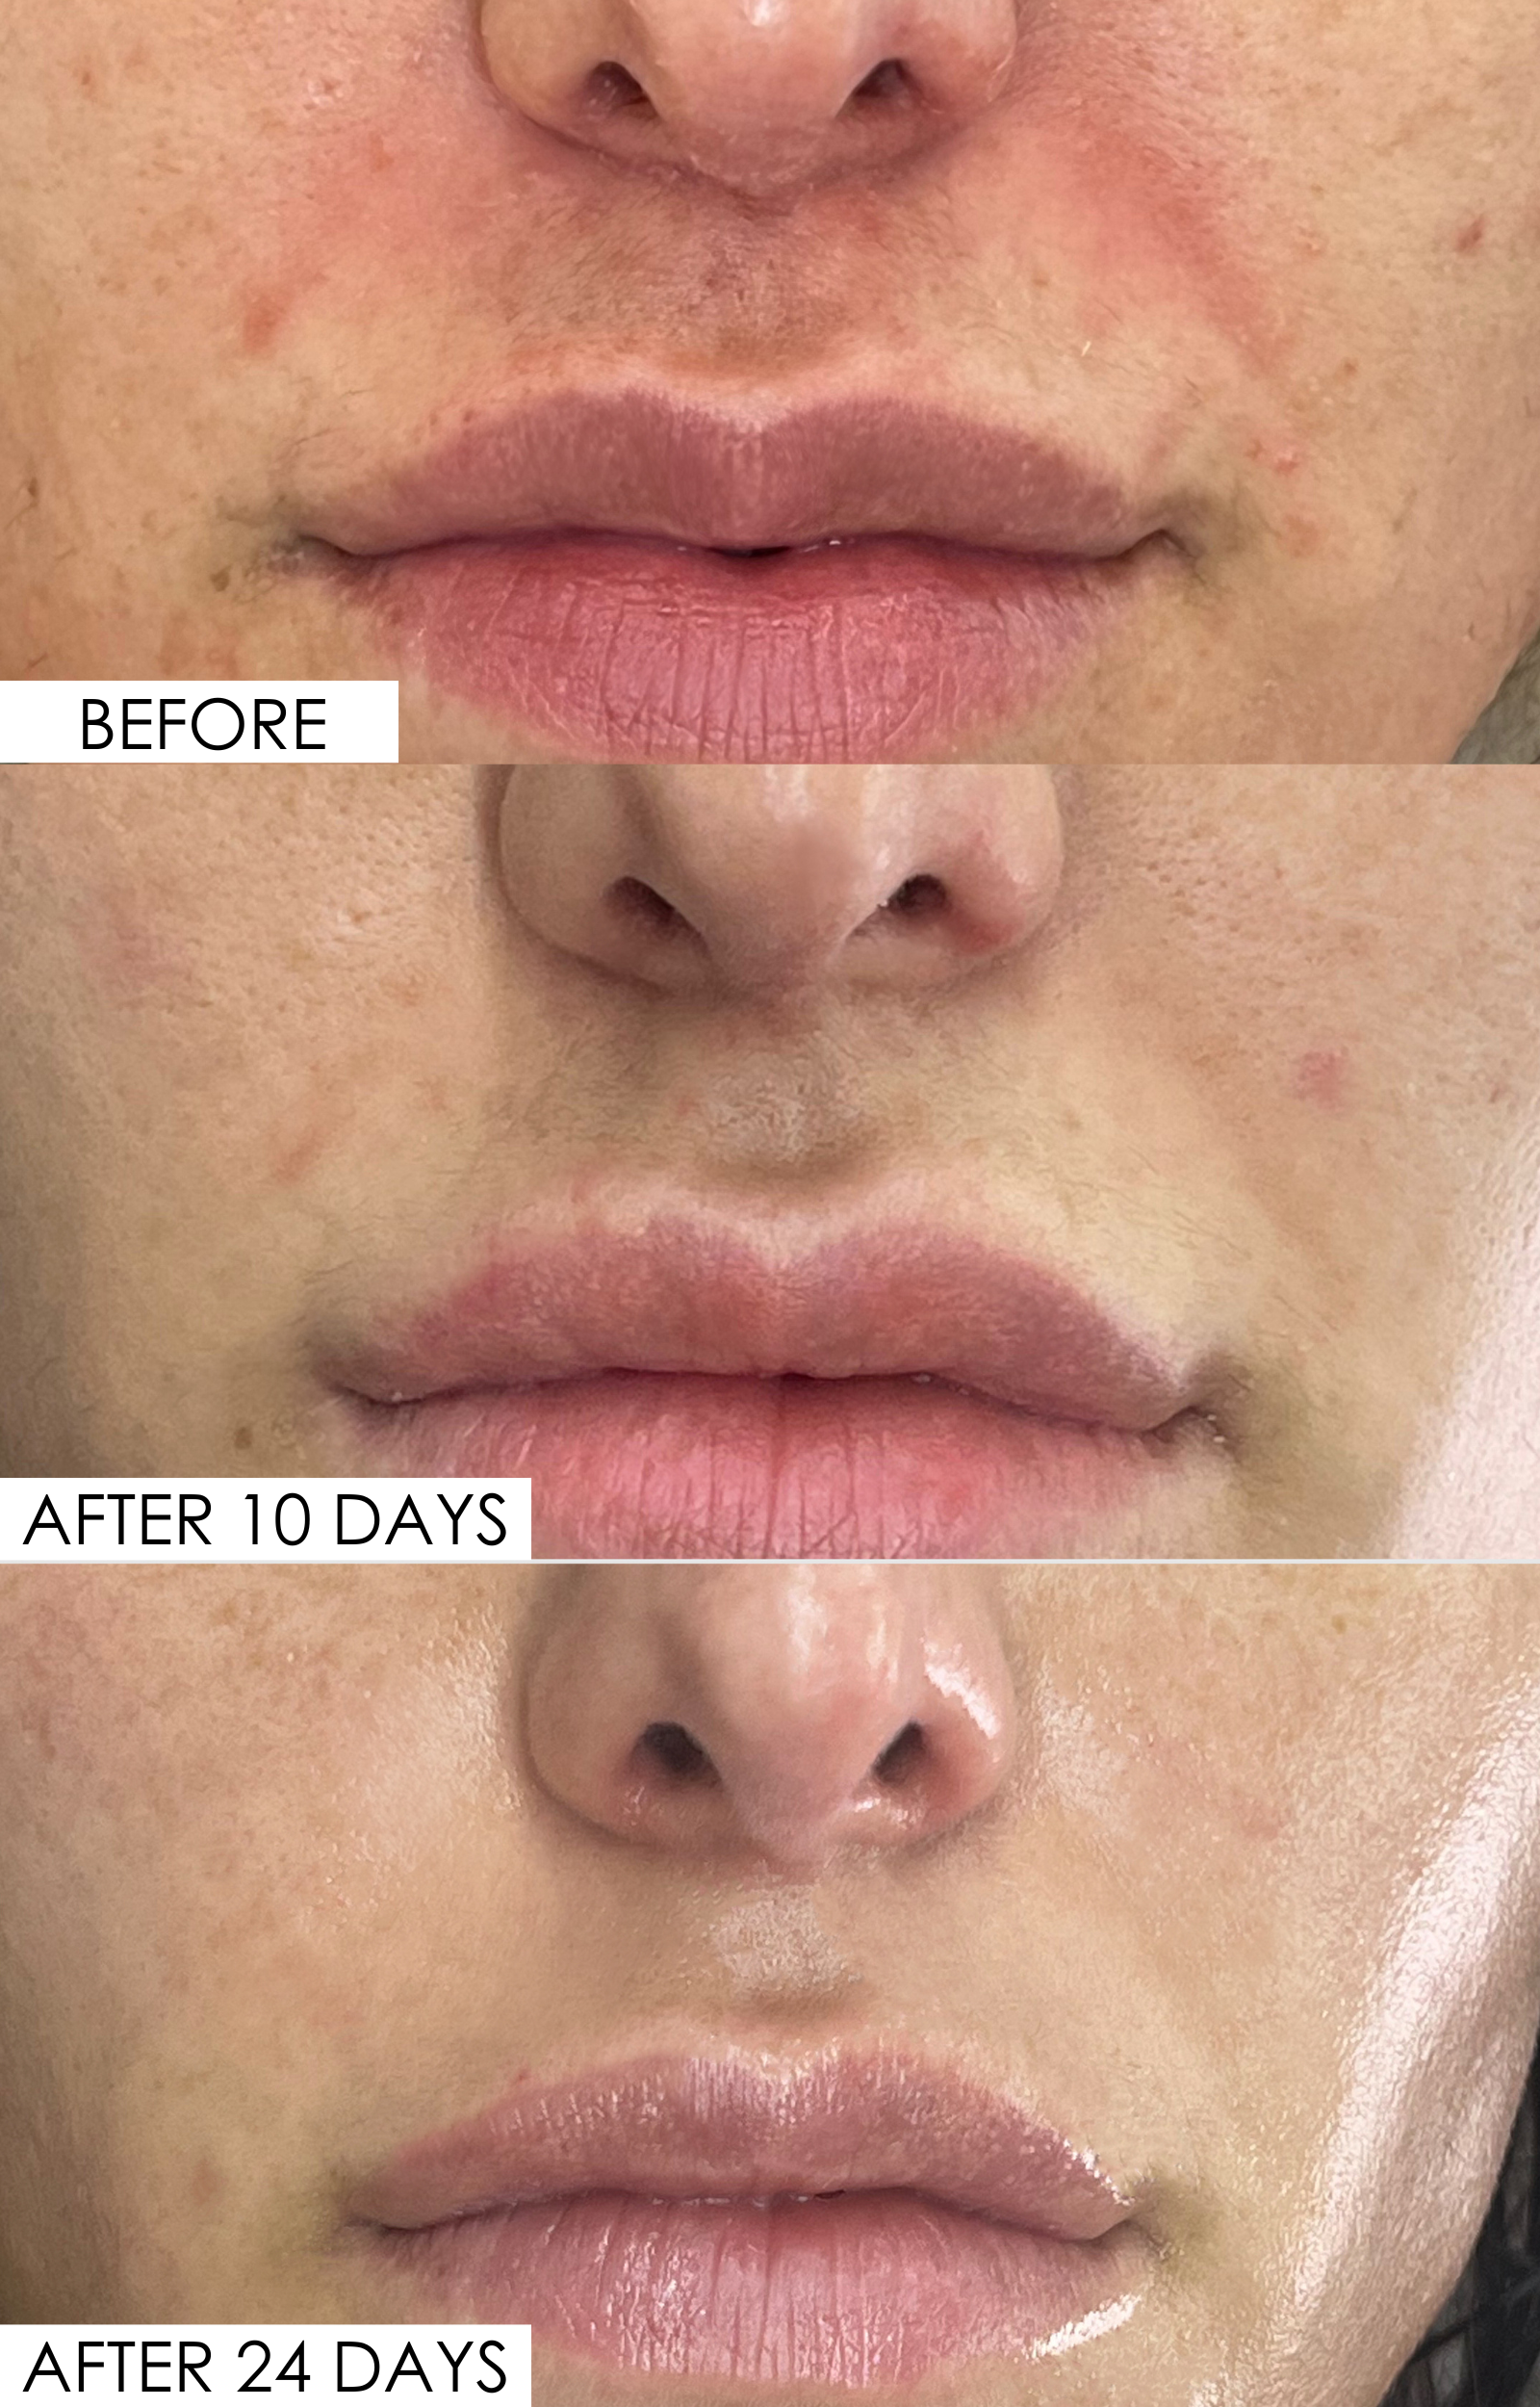 a before and after of a nose and mouth area on a person. The first image at the top says 'before' and shows redness and hyperpigmentation. Then an image saying 'after 10 days', showing less redness, then finally after 'after 24 days', showing a more even-looking skin tone, quite a difference from the 'before' shot. 